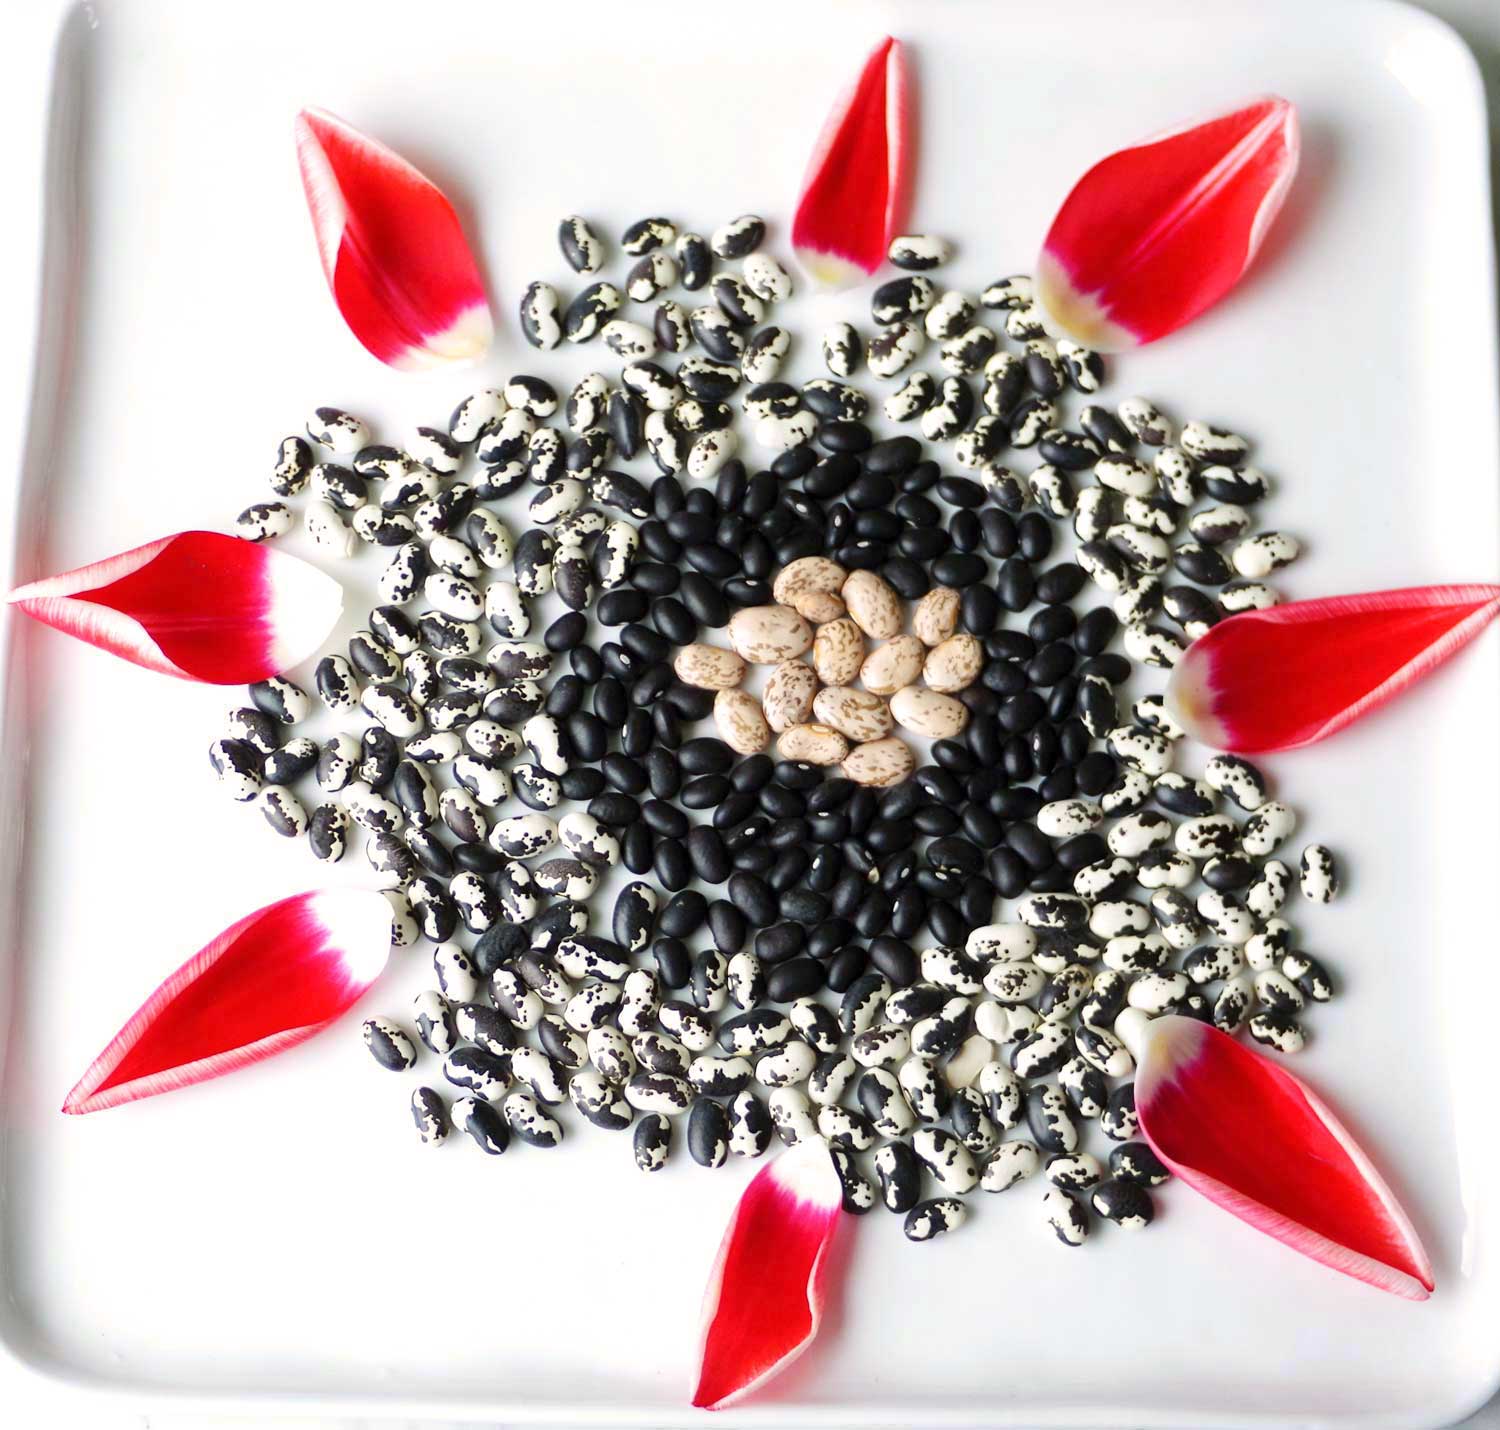 Orca, black, and pinto beans. And tulip petals. Why not?